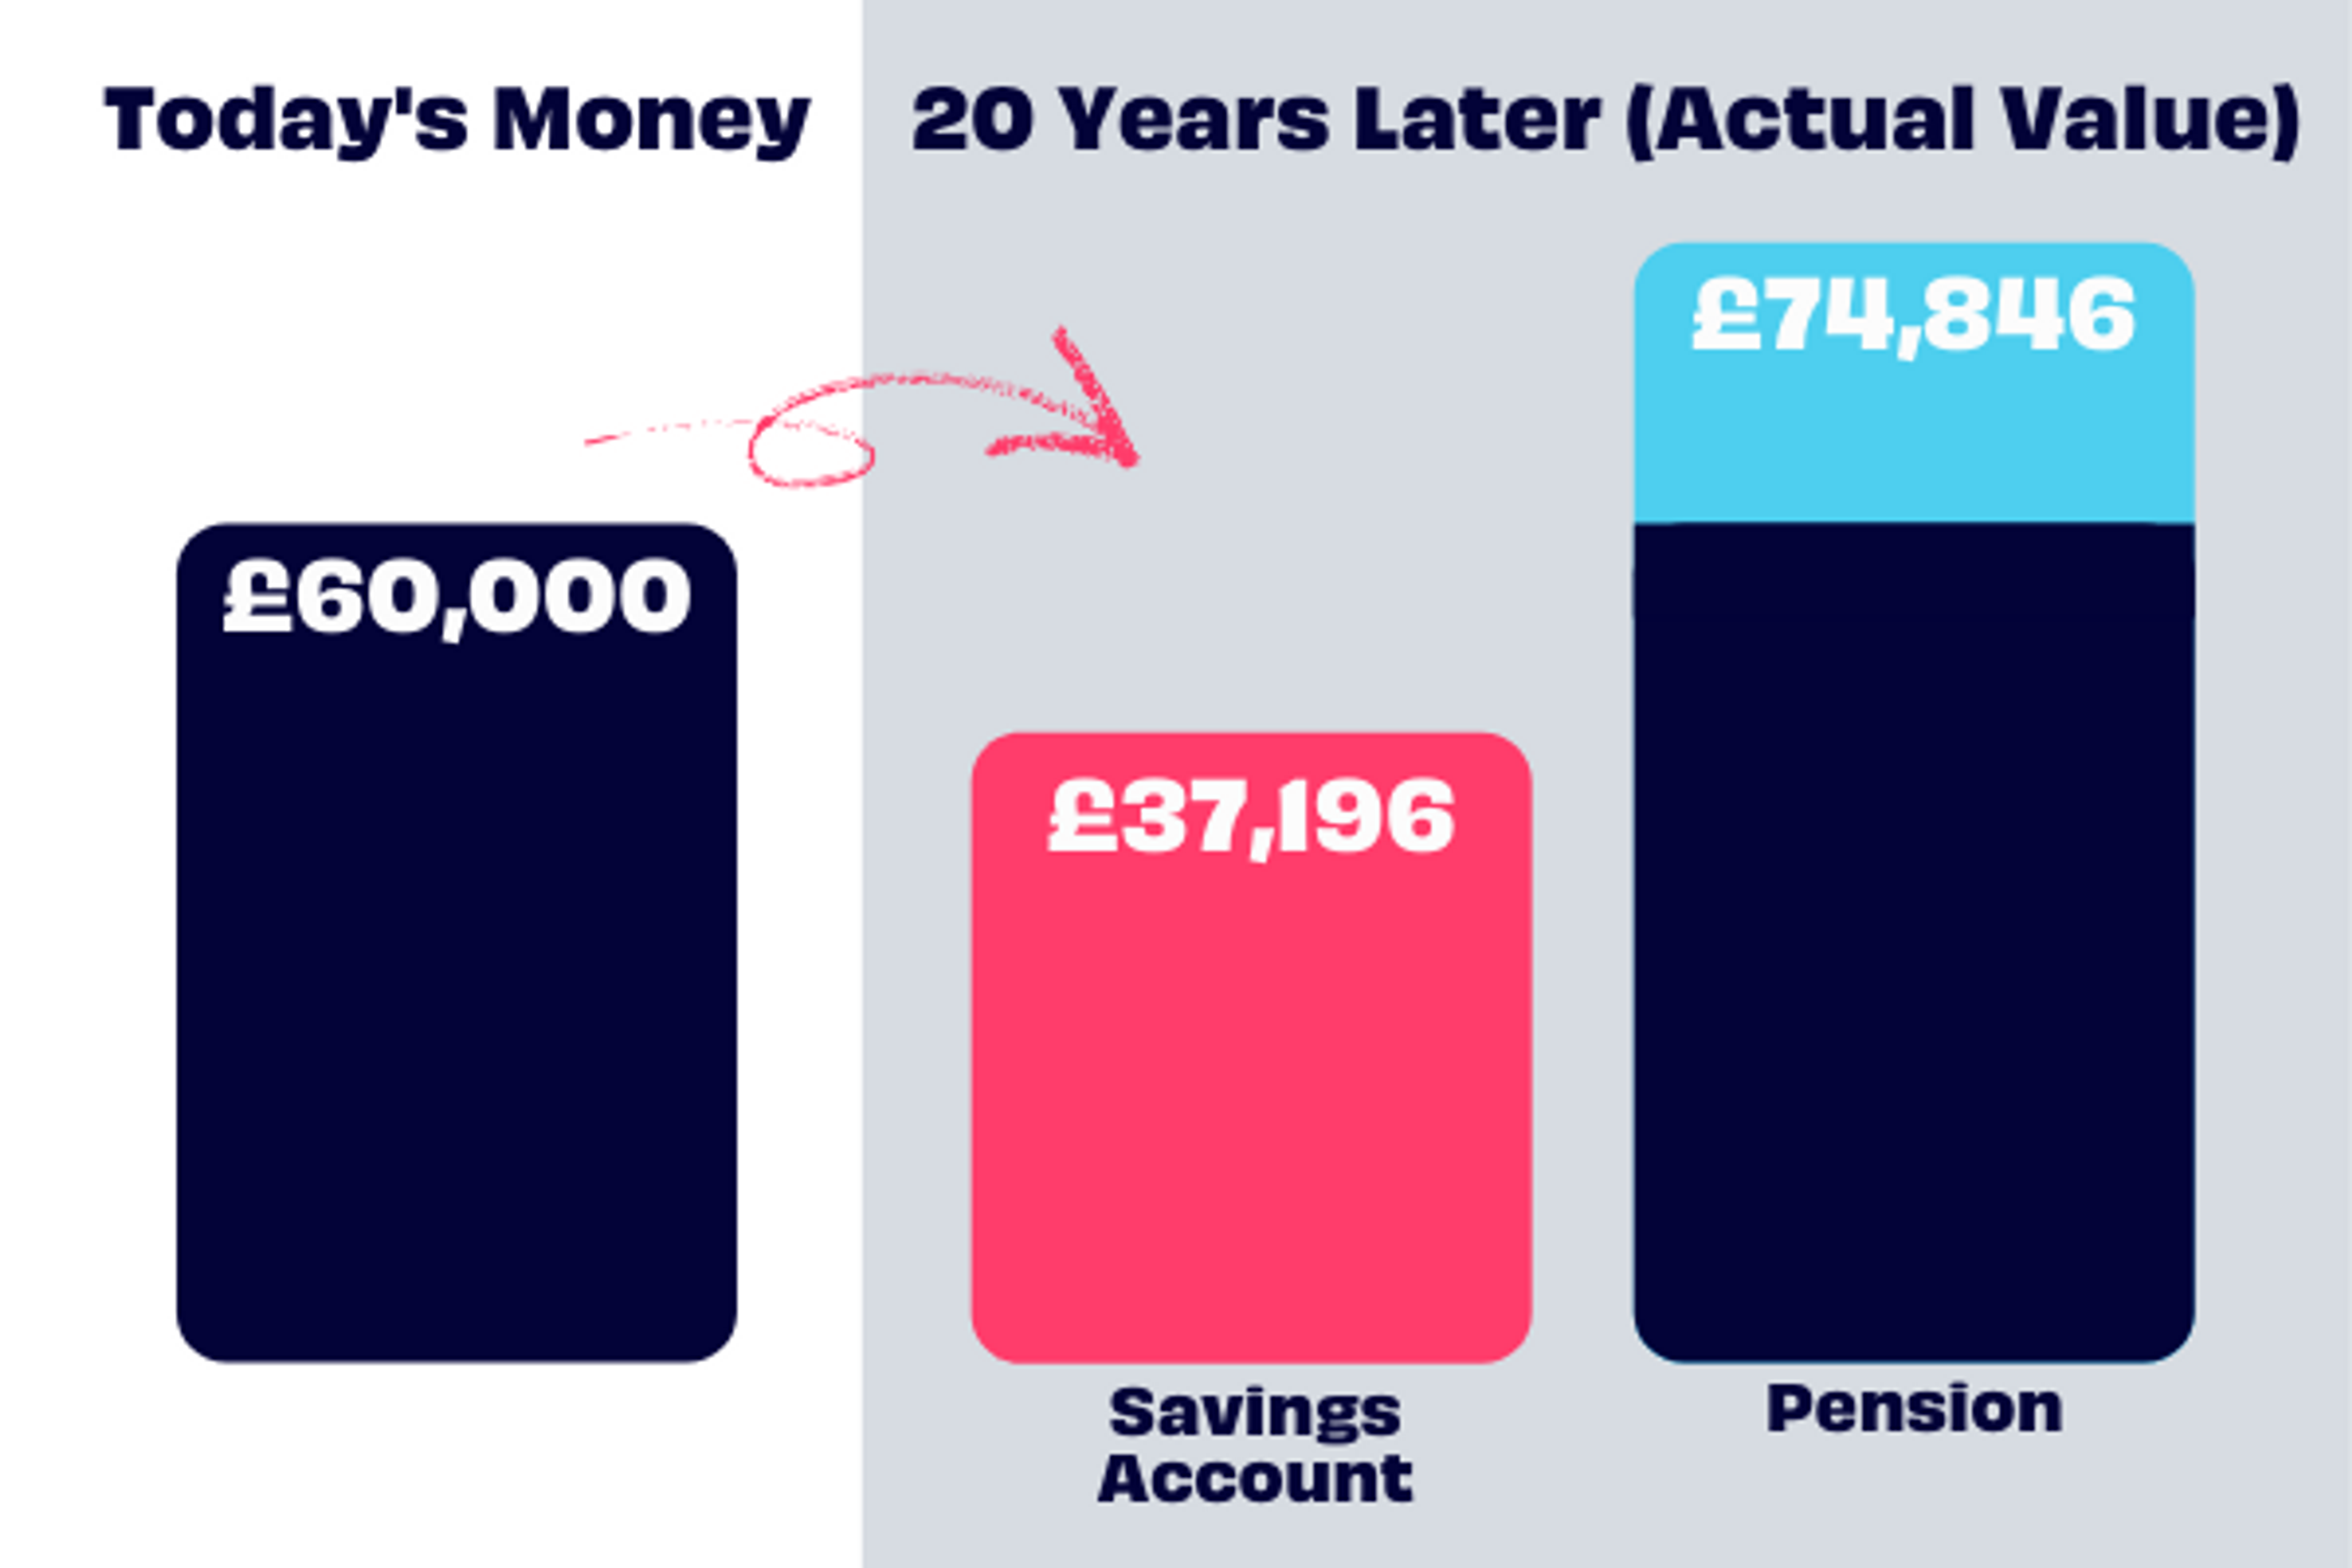 A column chart showing how savings are reduced by inflation over 20 years